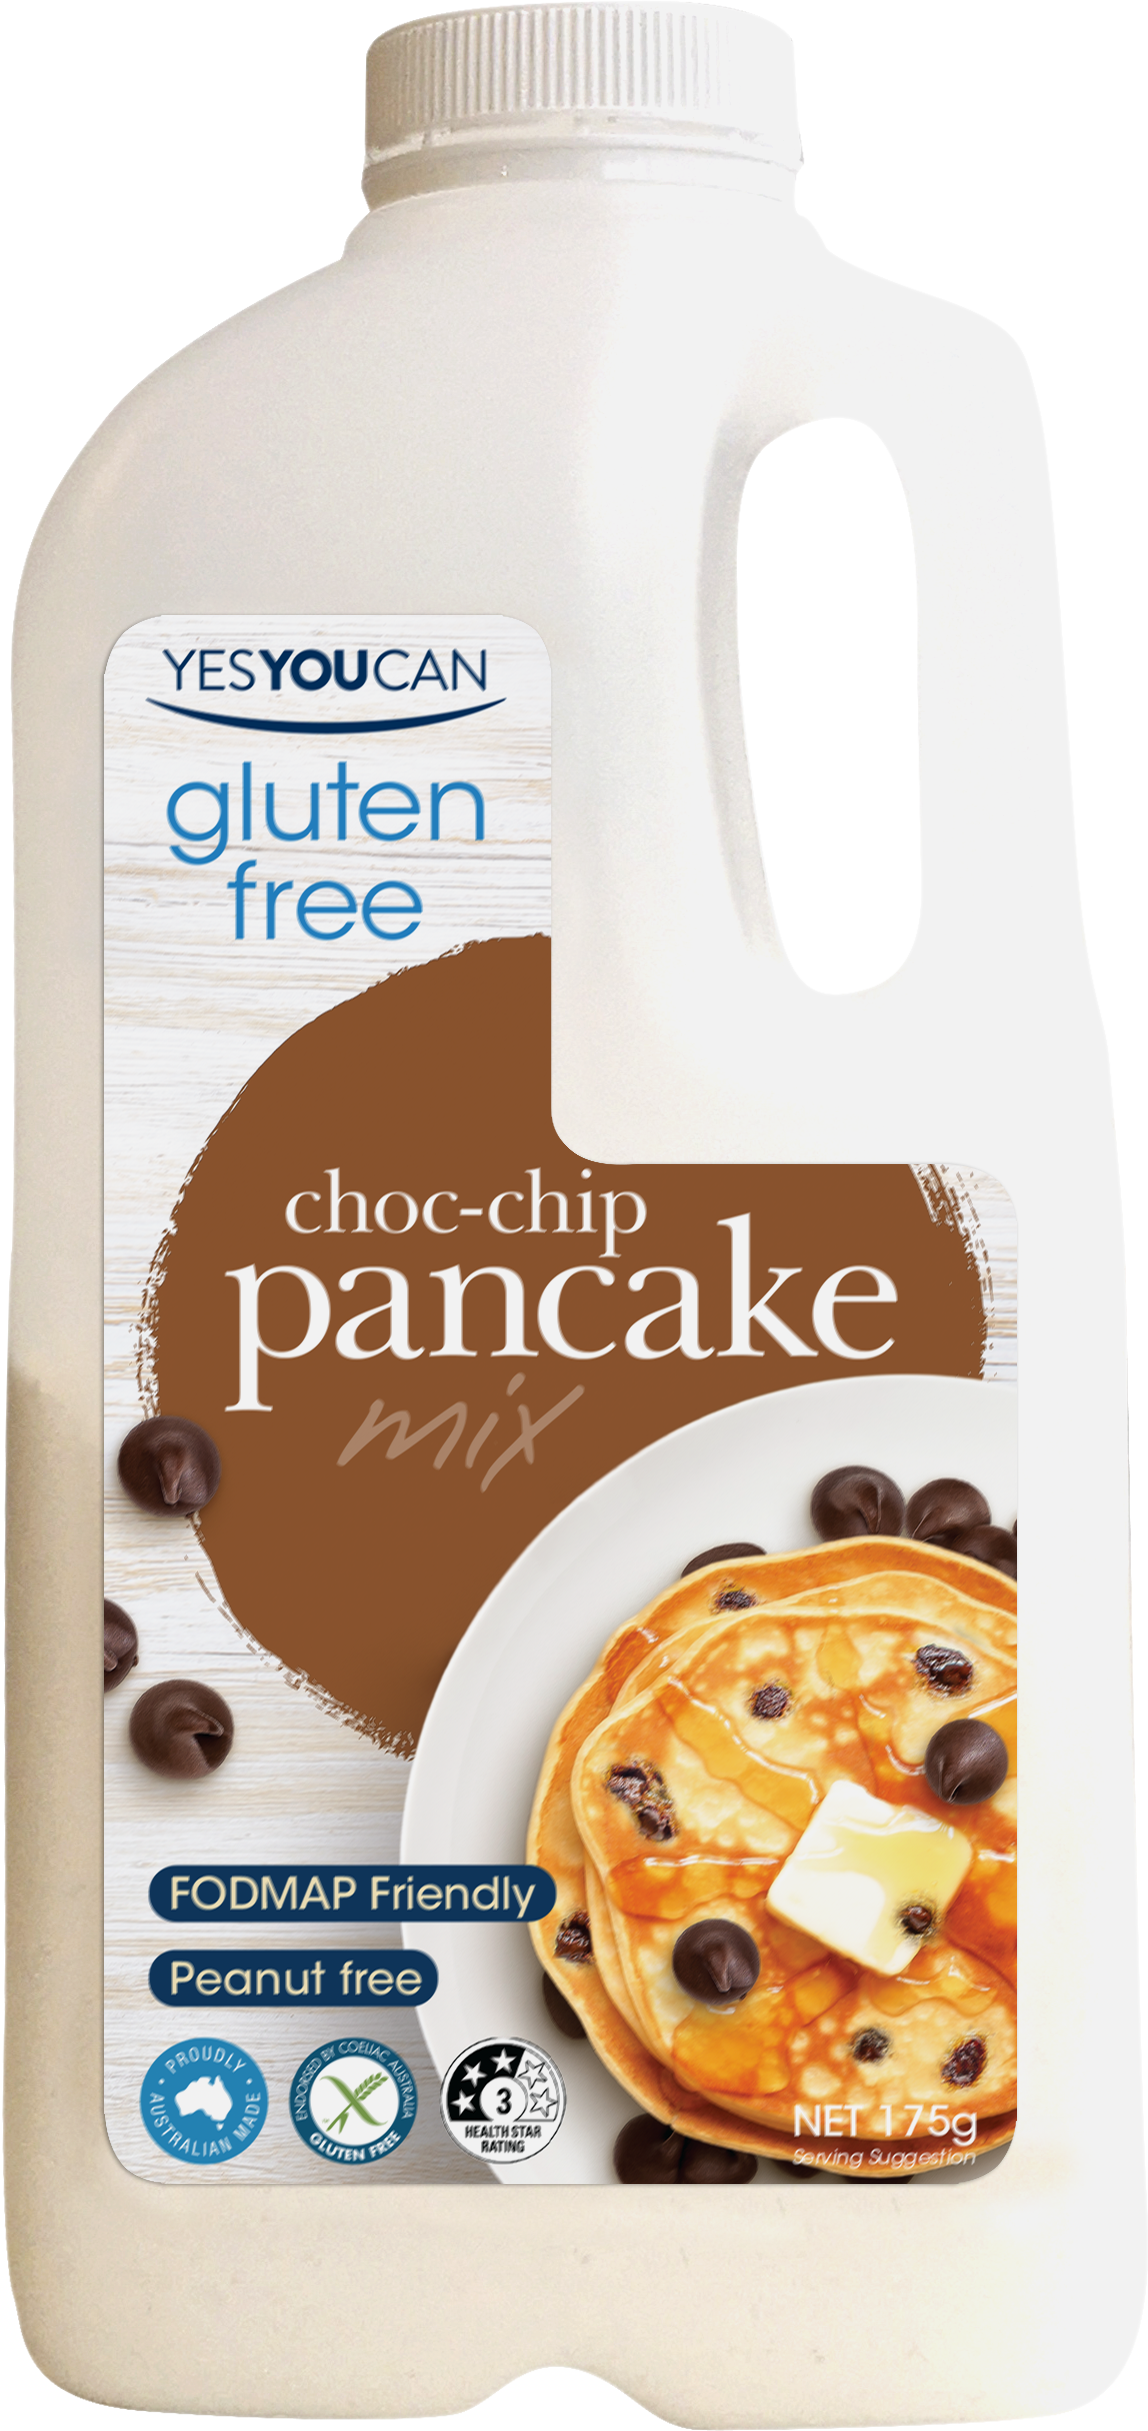 chocolate chip pancake gluten free yesyoucan front image product photo